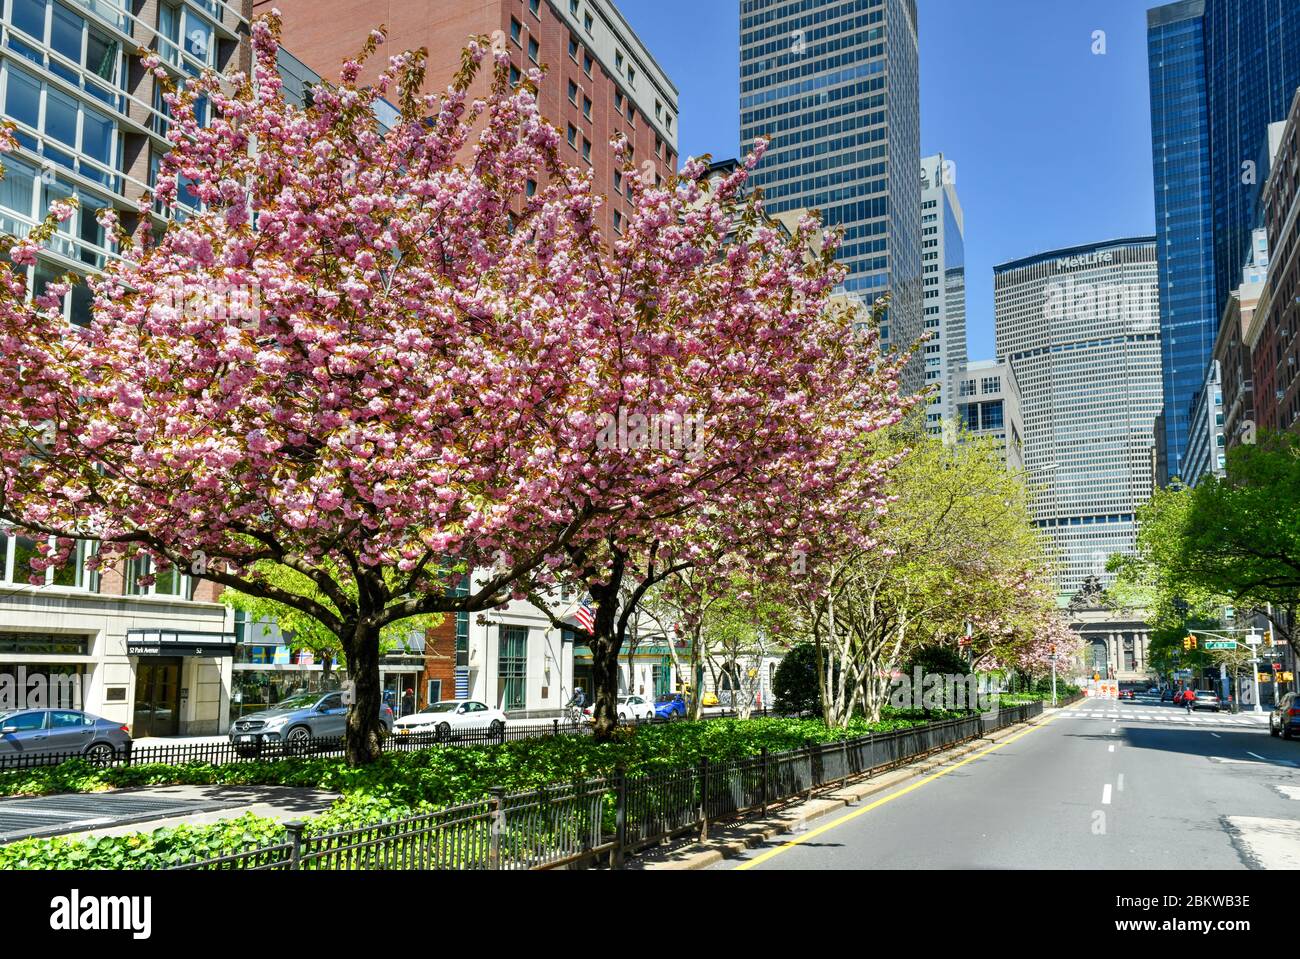 New York, NY - April 19, 2020: Grand Central Terminal  and Park Avenue during Spring bloom. Stock Photo